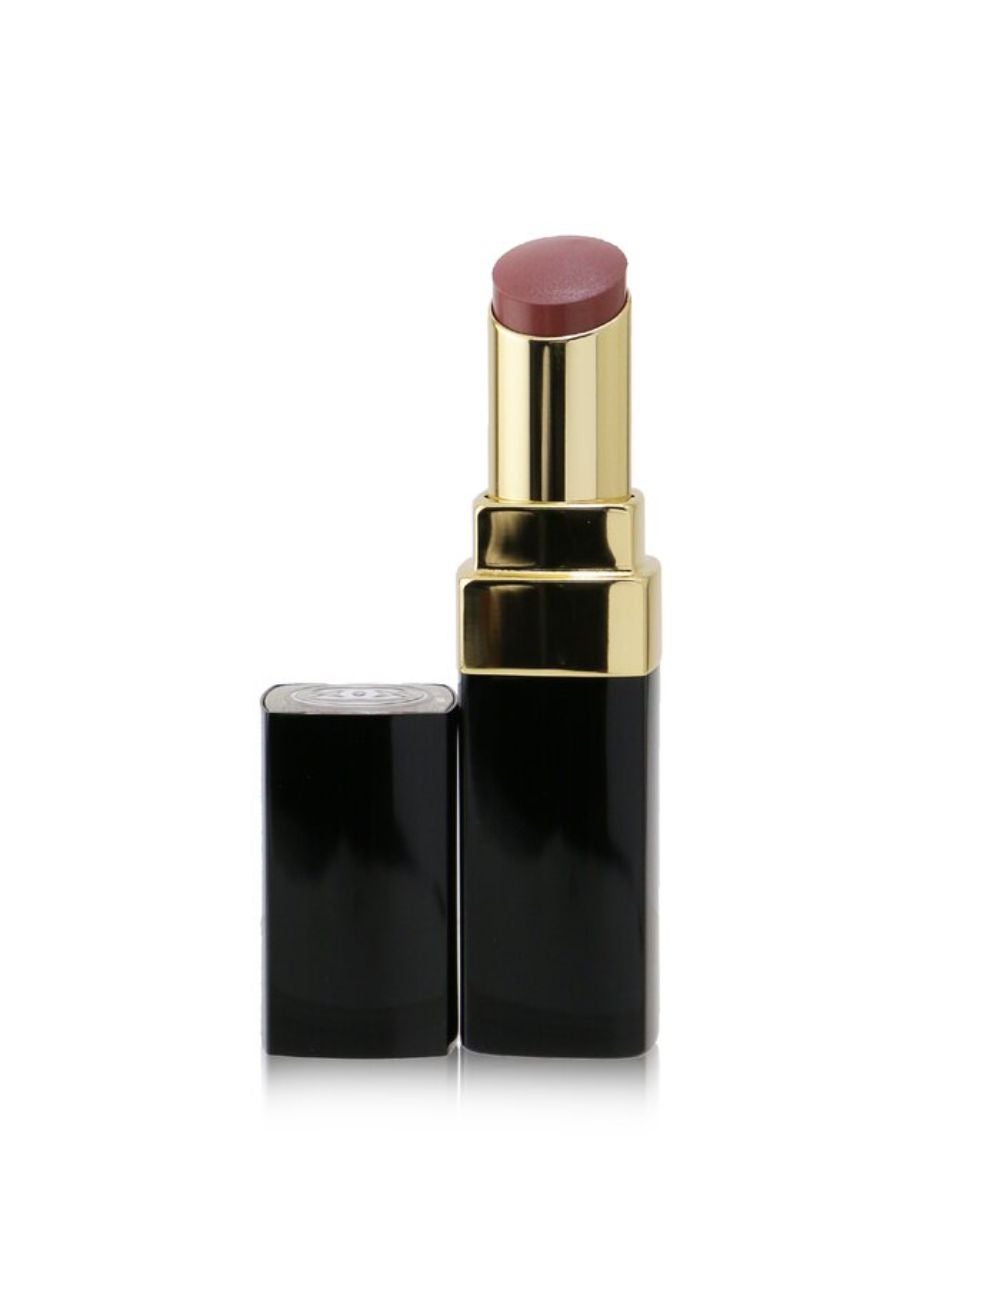 Chanel Rouge Coco Flash Hydrating Vibrant Shine Lip Colour - # 116 Easy 3g